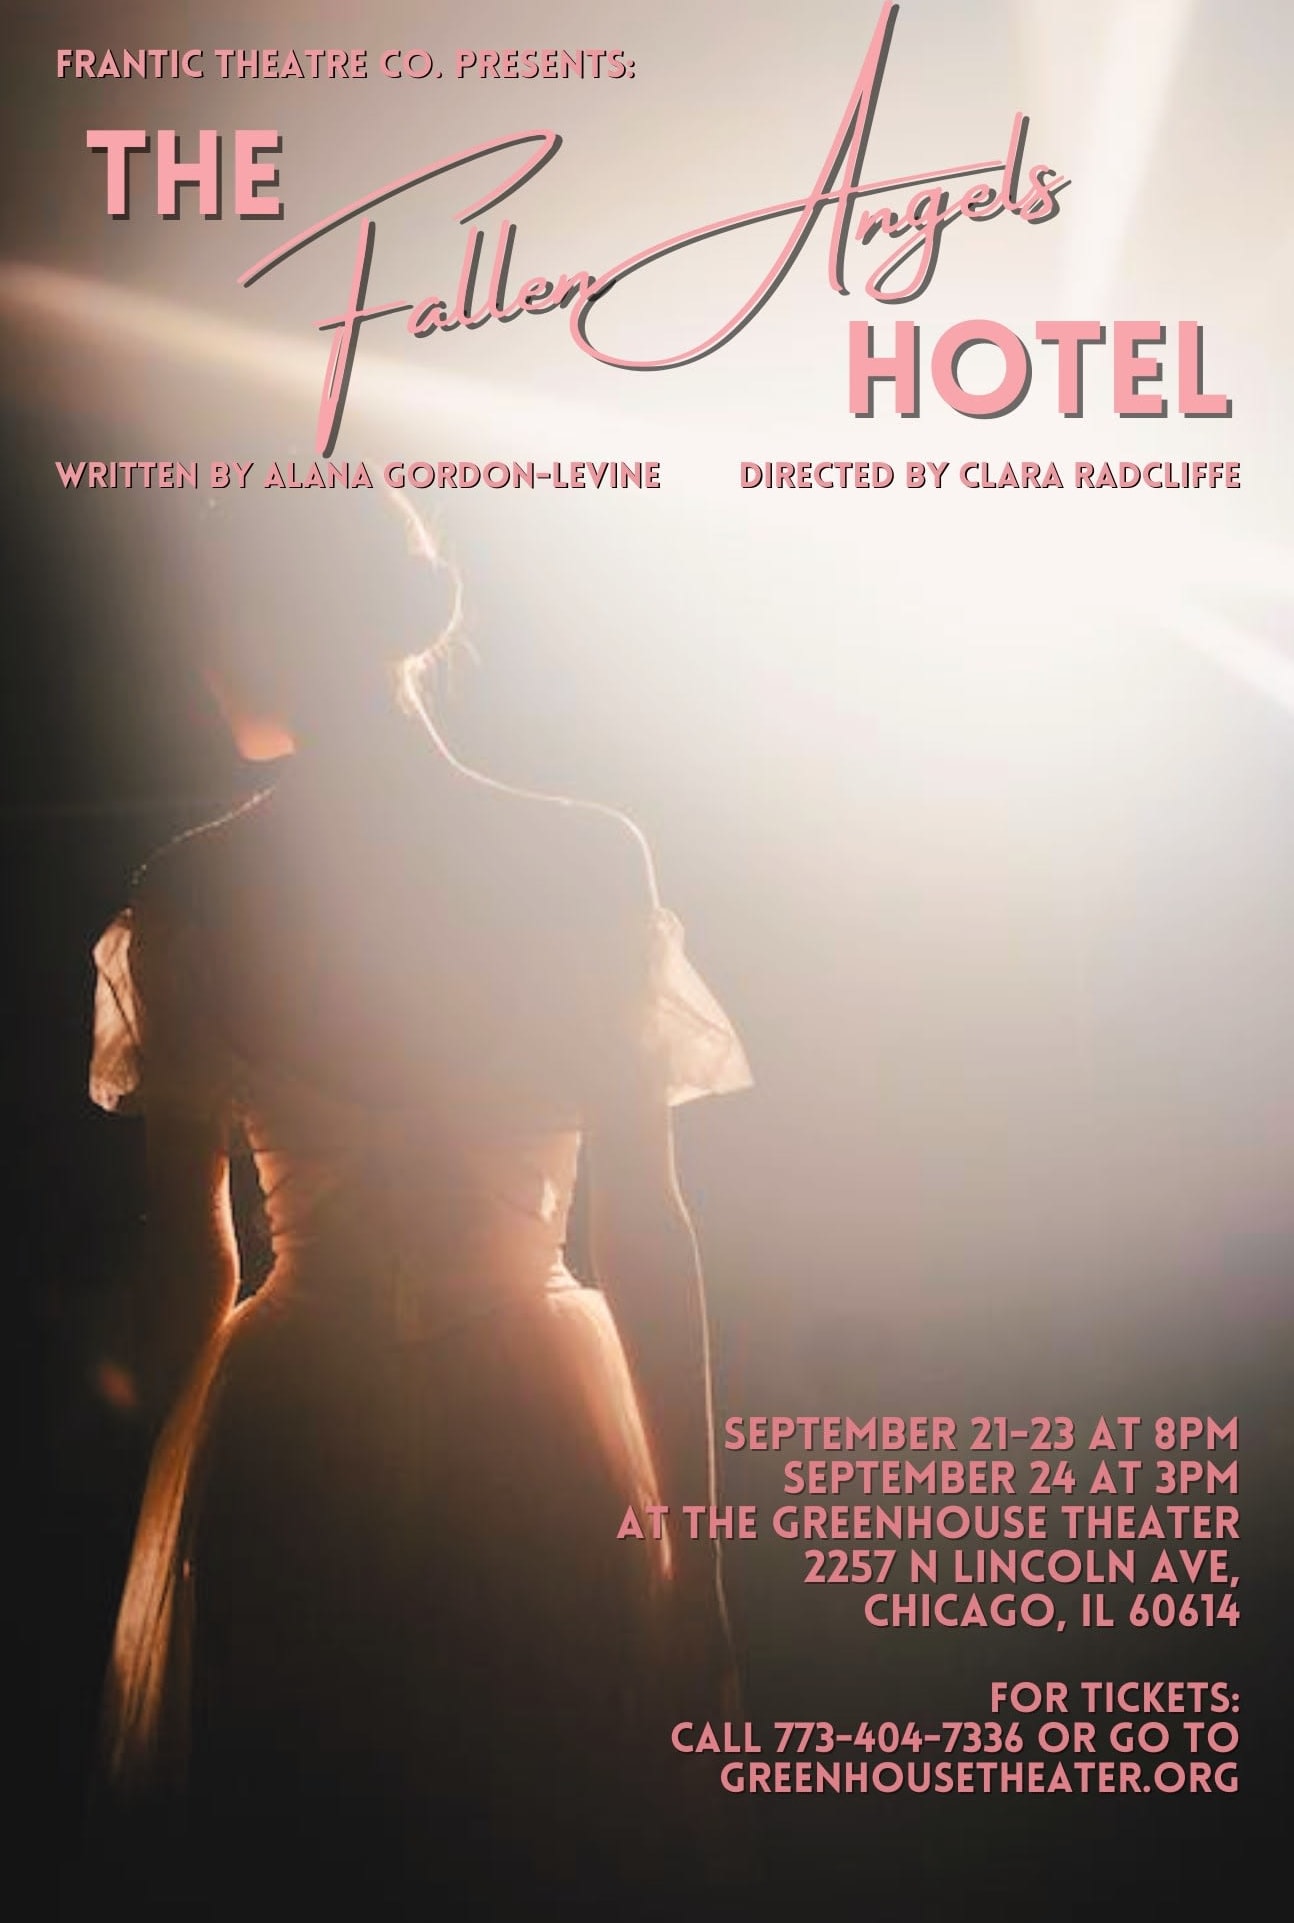 The Fallen Angels Hotel show poster